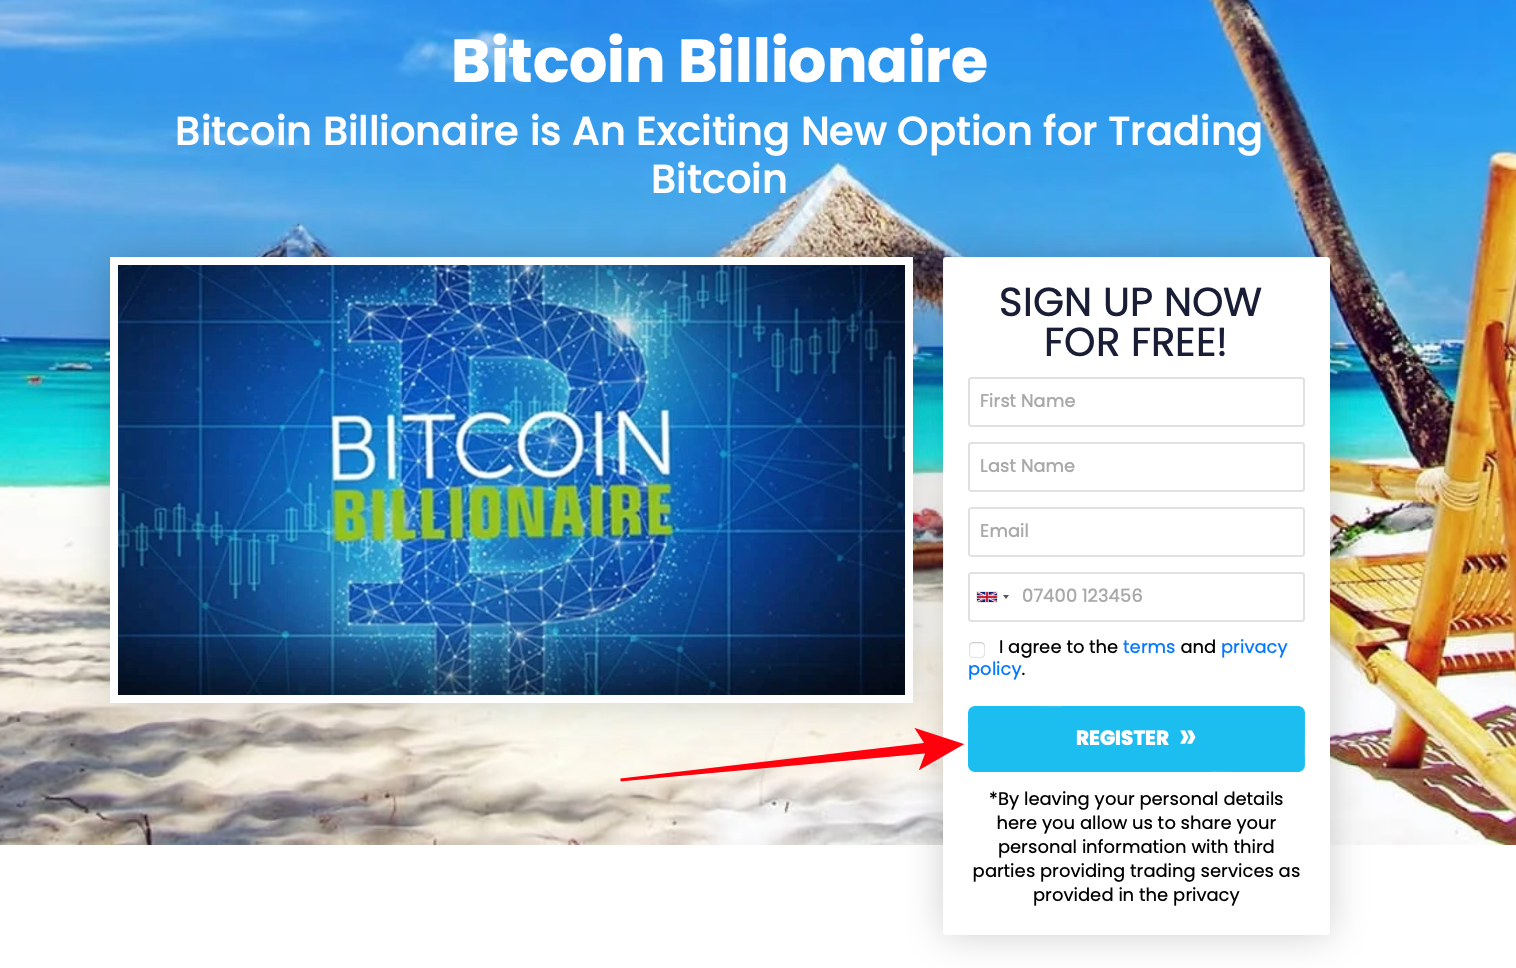 How to create an account with the Bitcoin Billionaire